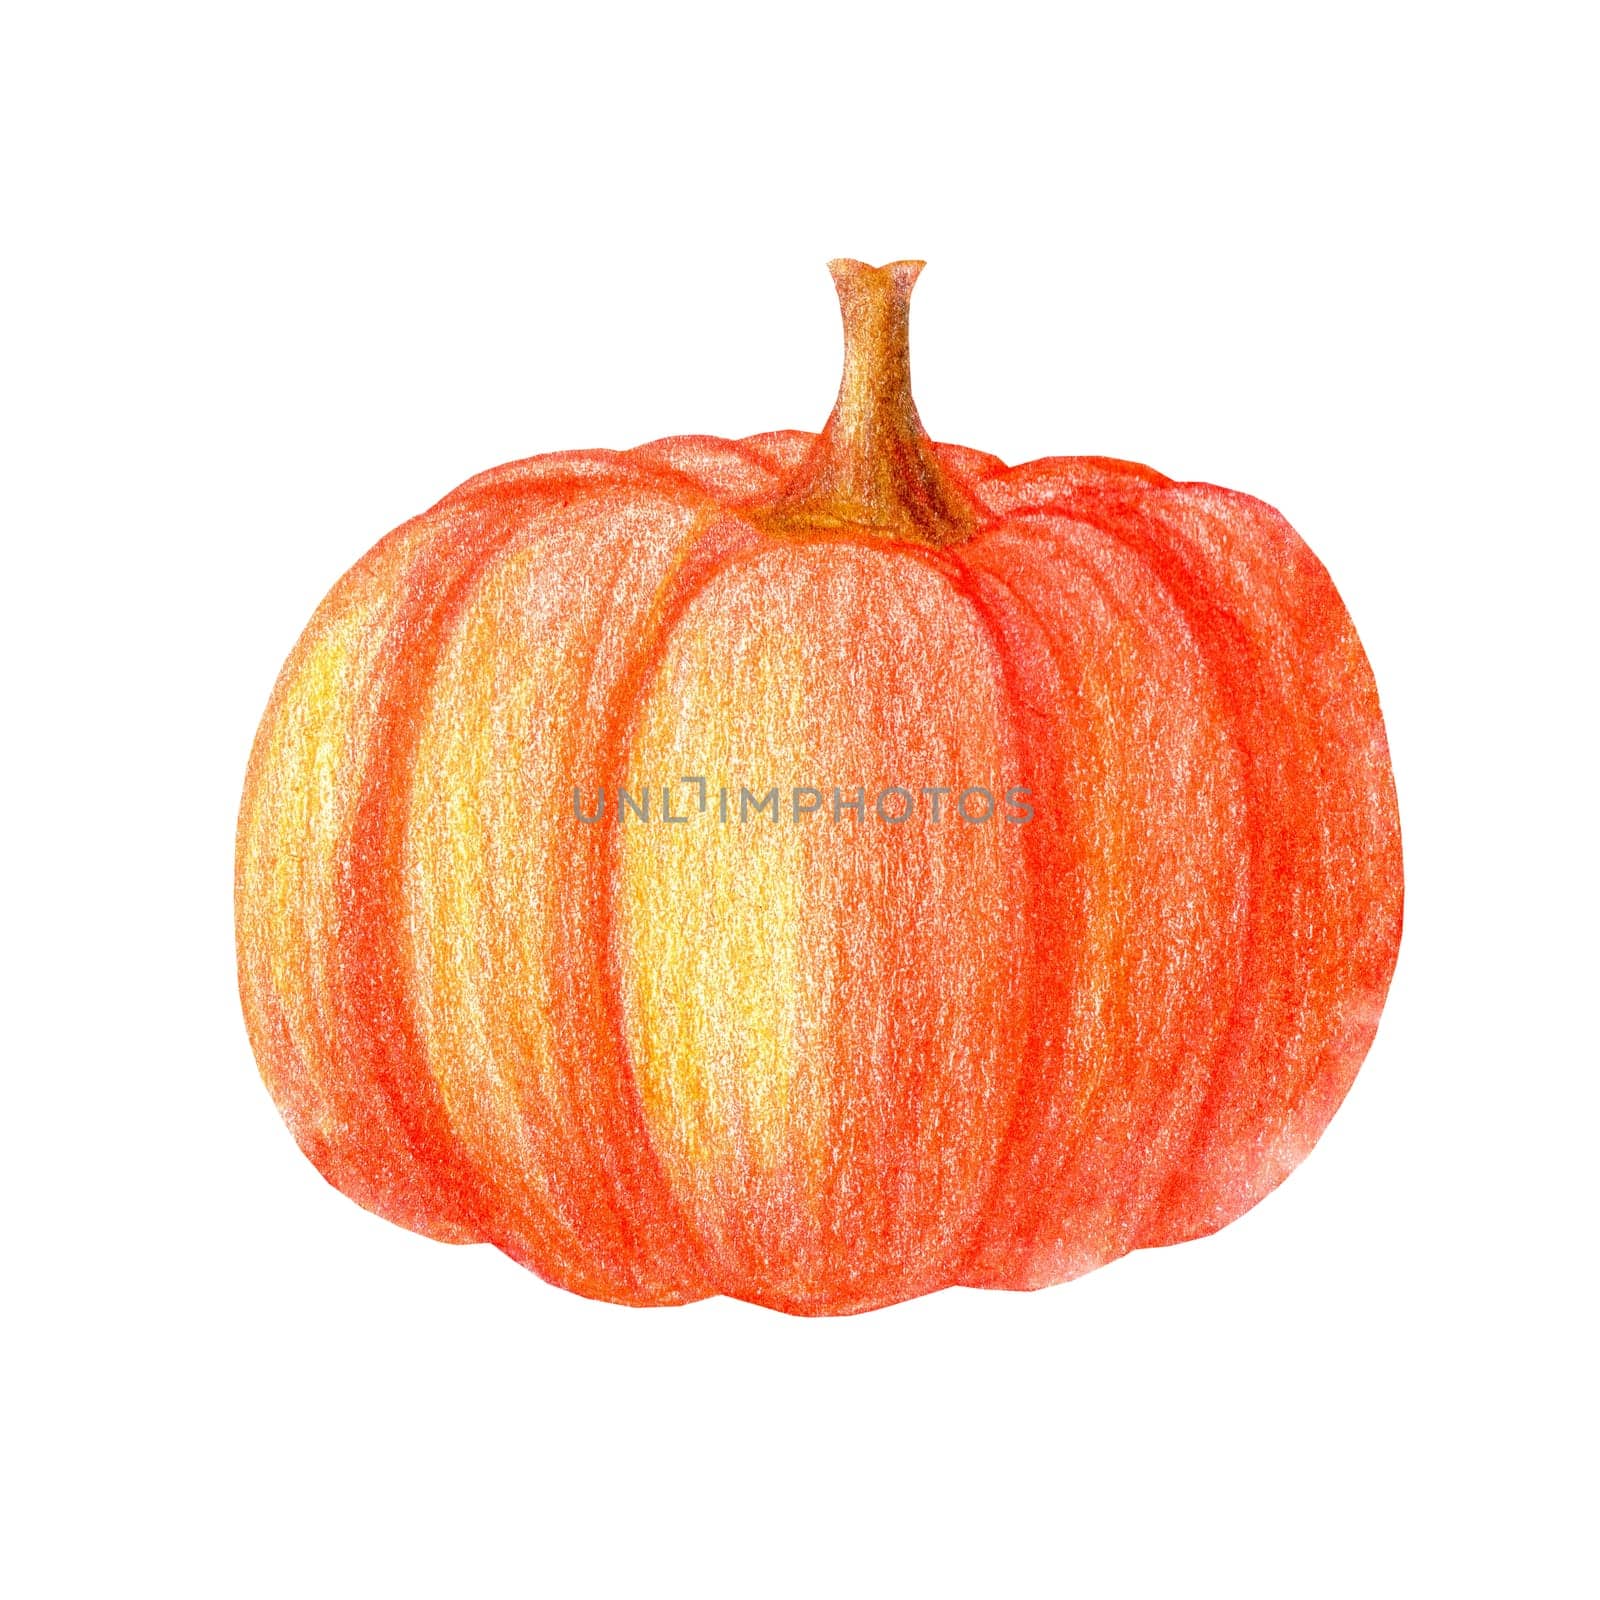 Cute watercolor pumpkin illustration. Hand drawn colored colorful autumn hygge harvest Halloween